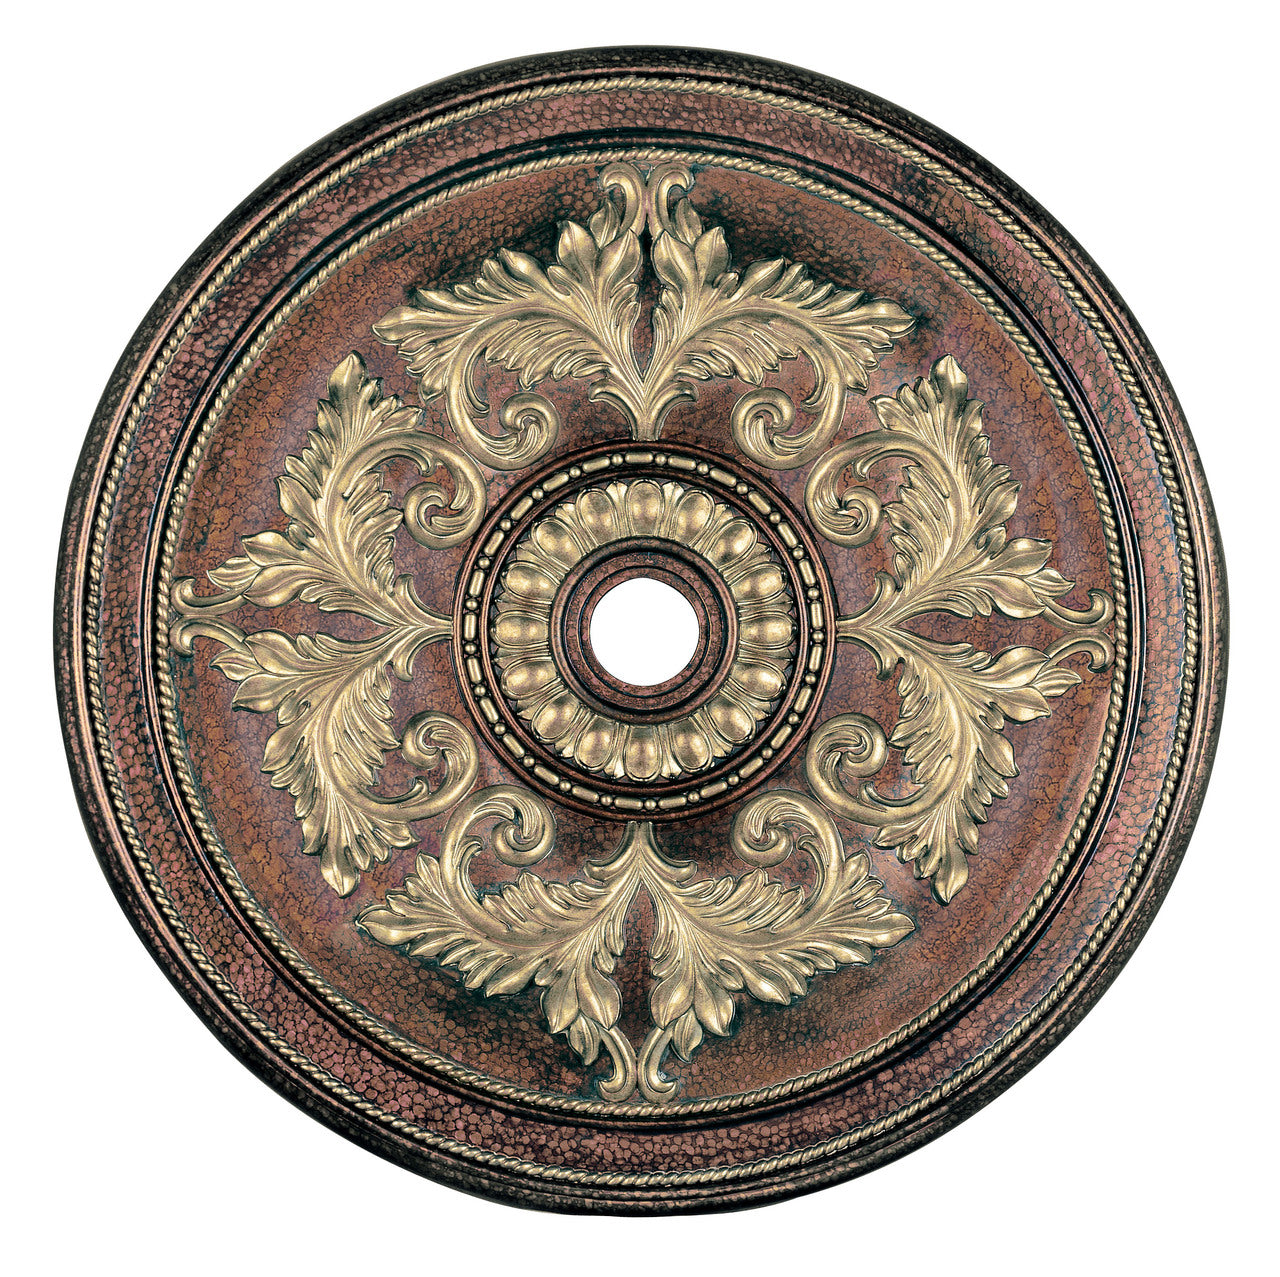 LIVEX Lighting 8228-64 Ceiling Medallion in Palacial Bronze with Gilded Accents